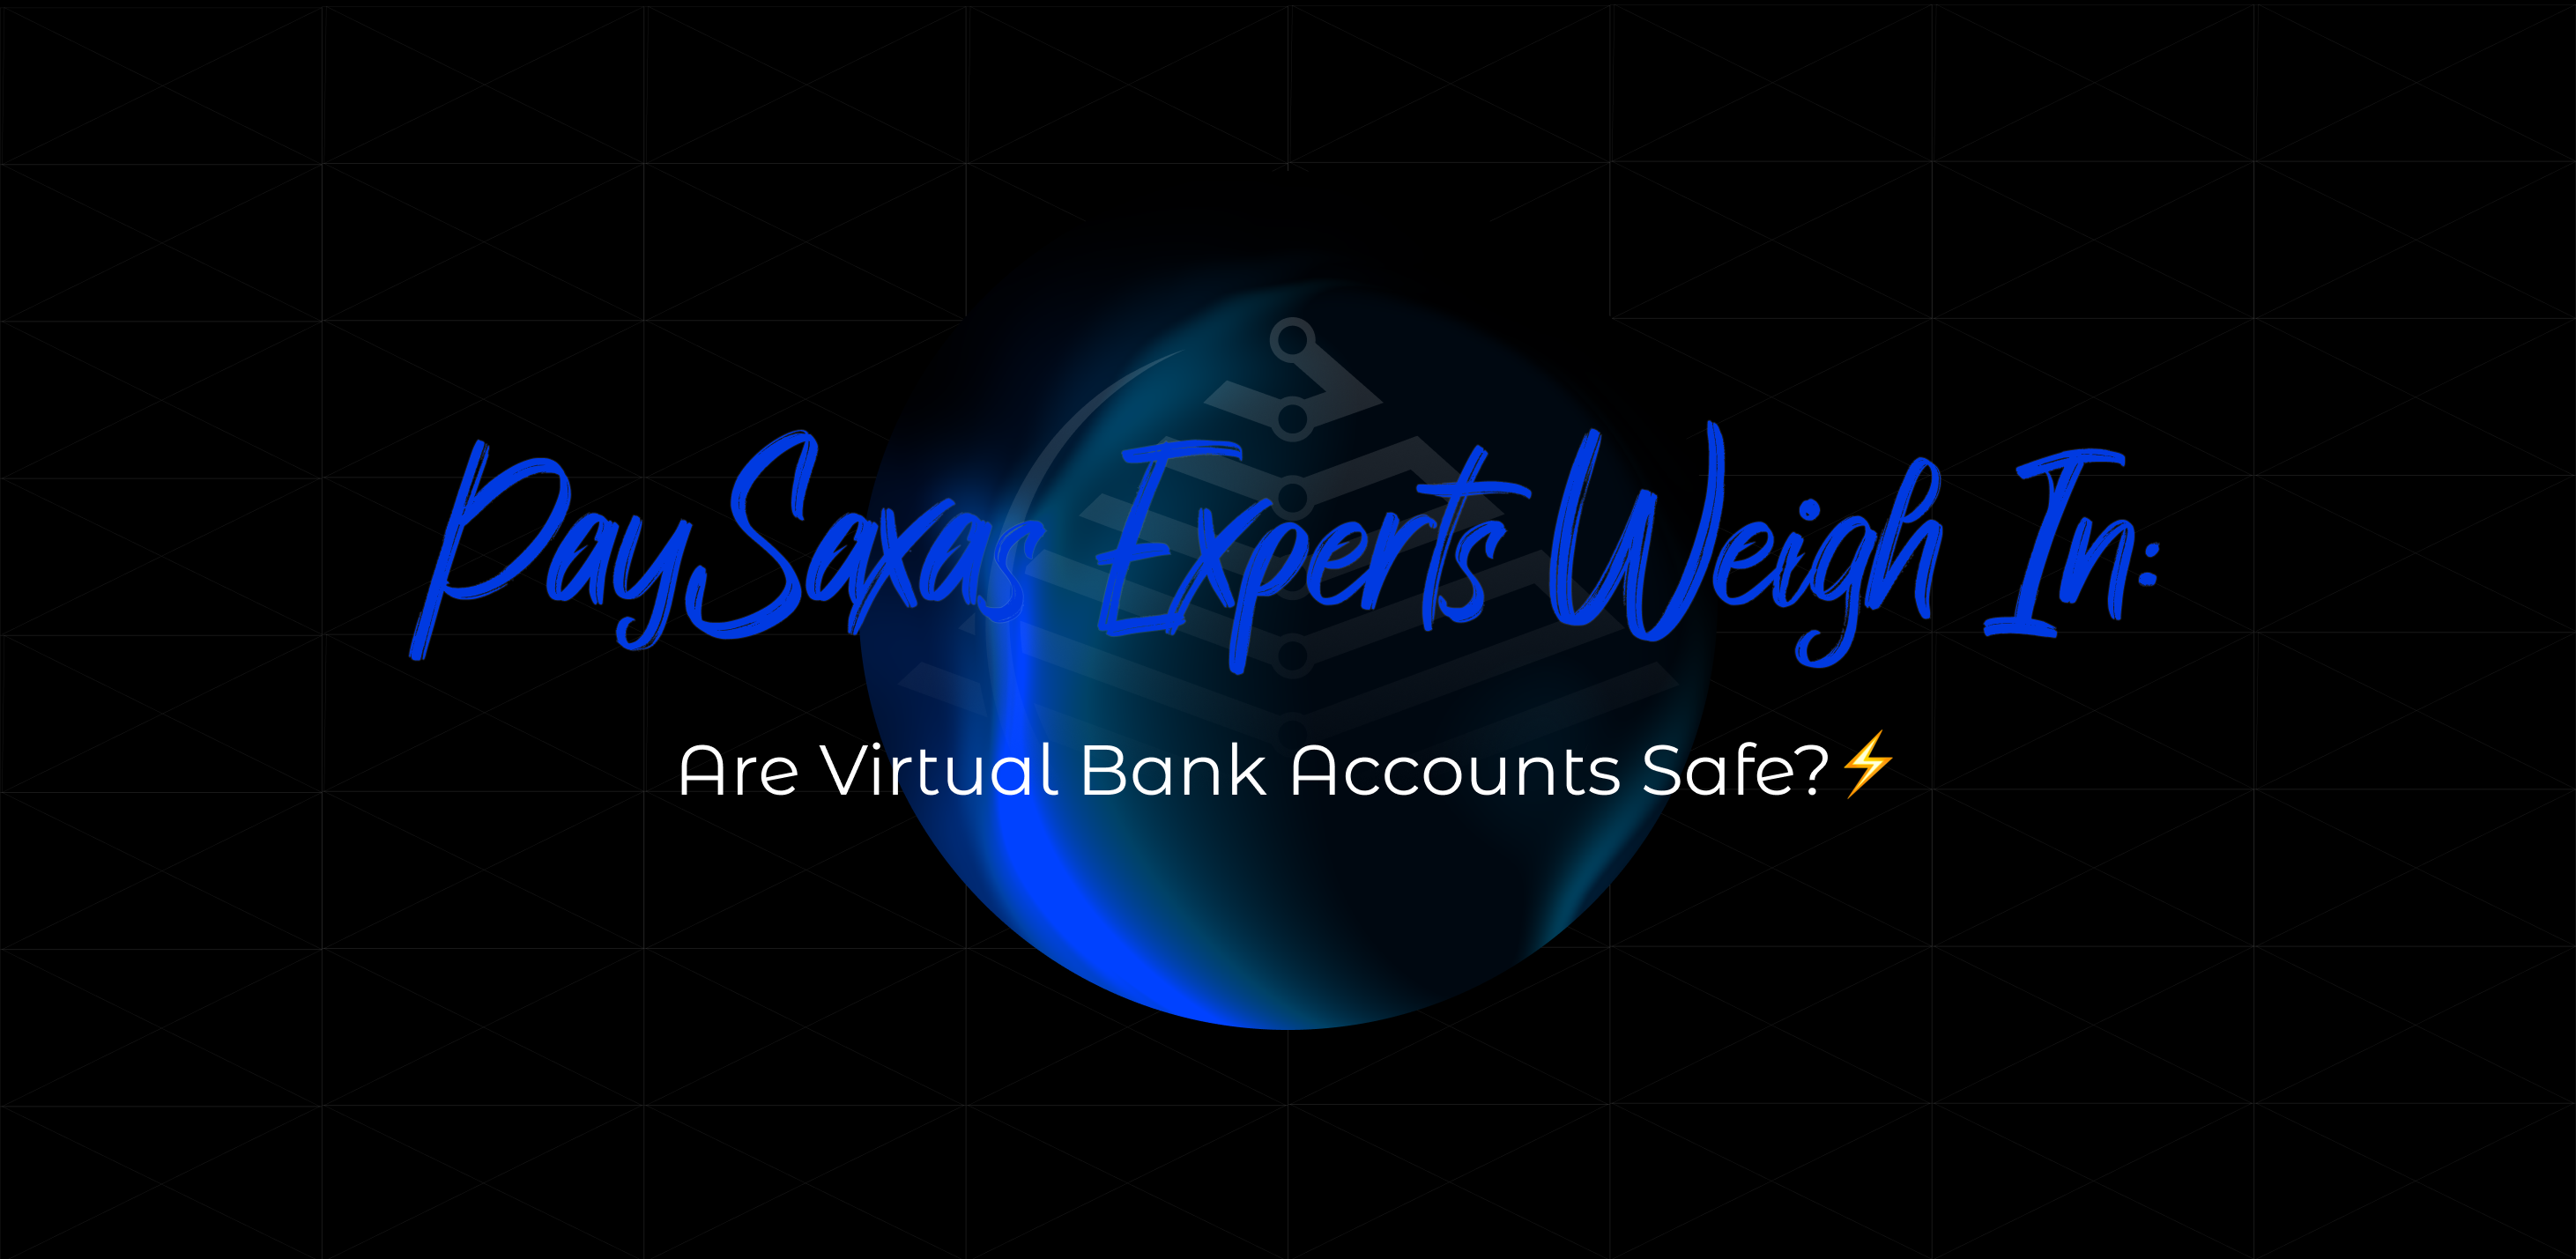 PaySaxas Experts Weigh In: Are Virtual Bank Accounts Safe?